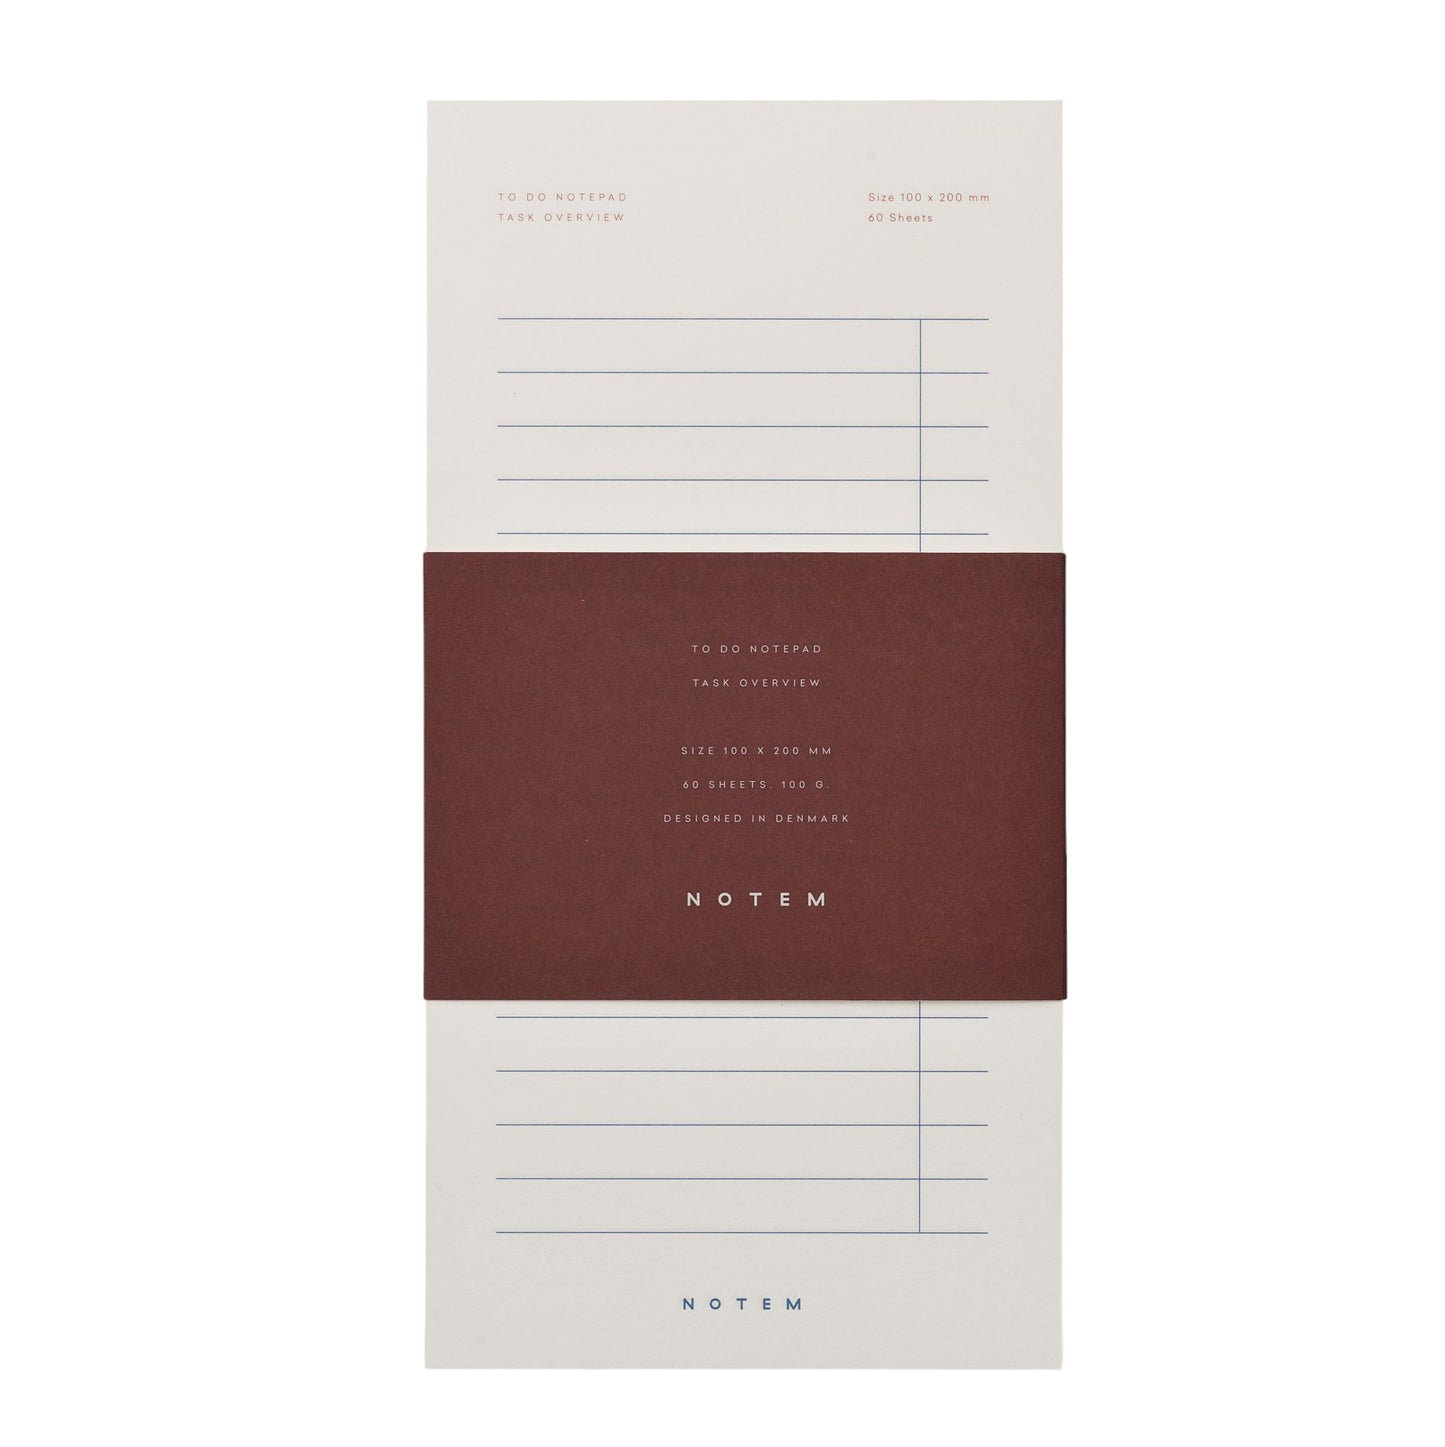 Daily To-Do Notepad with ivory sheets. Lined page with column to check-off progress, pictured with burgundy branded belly band